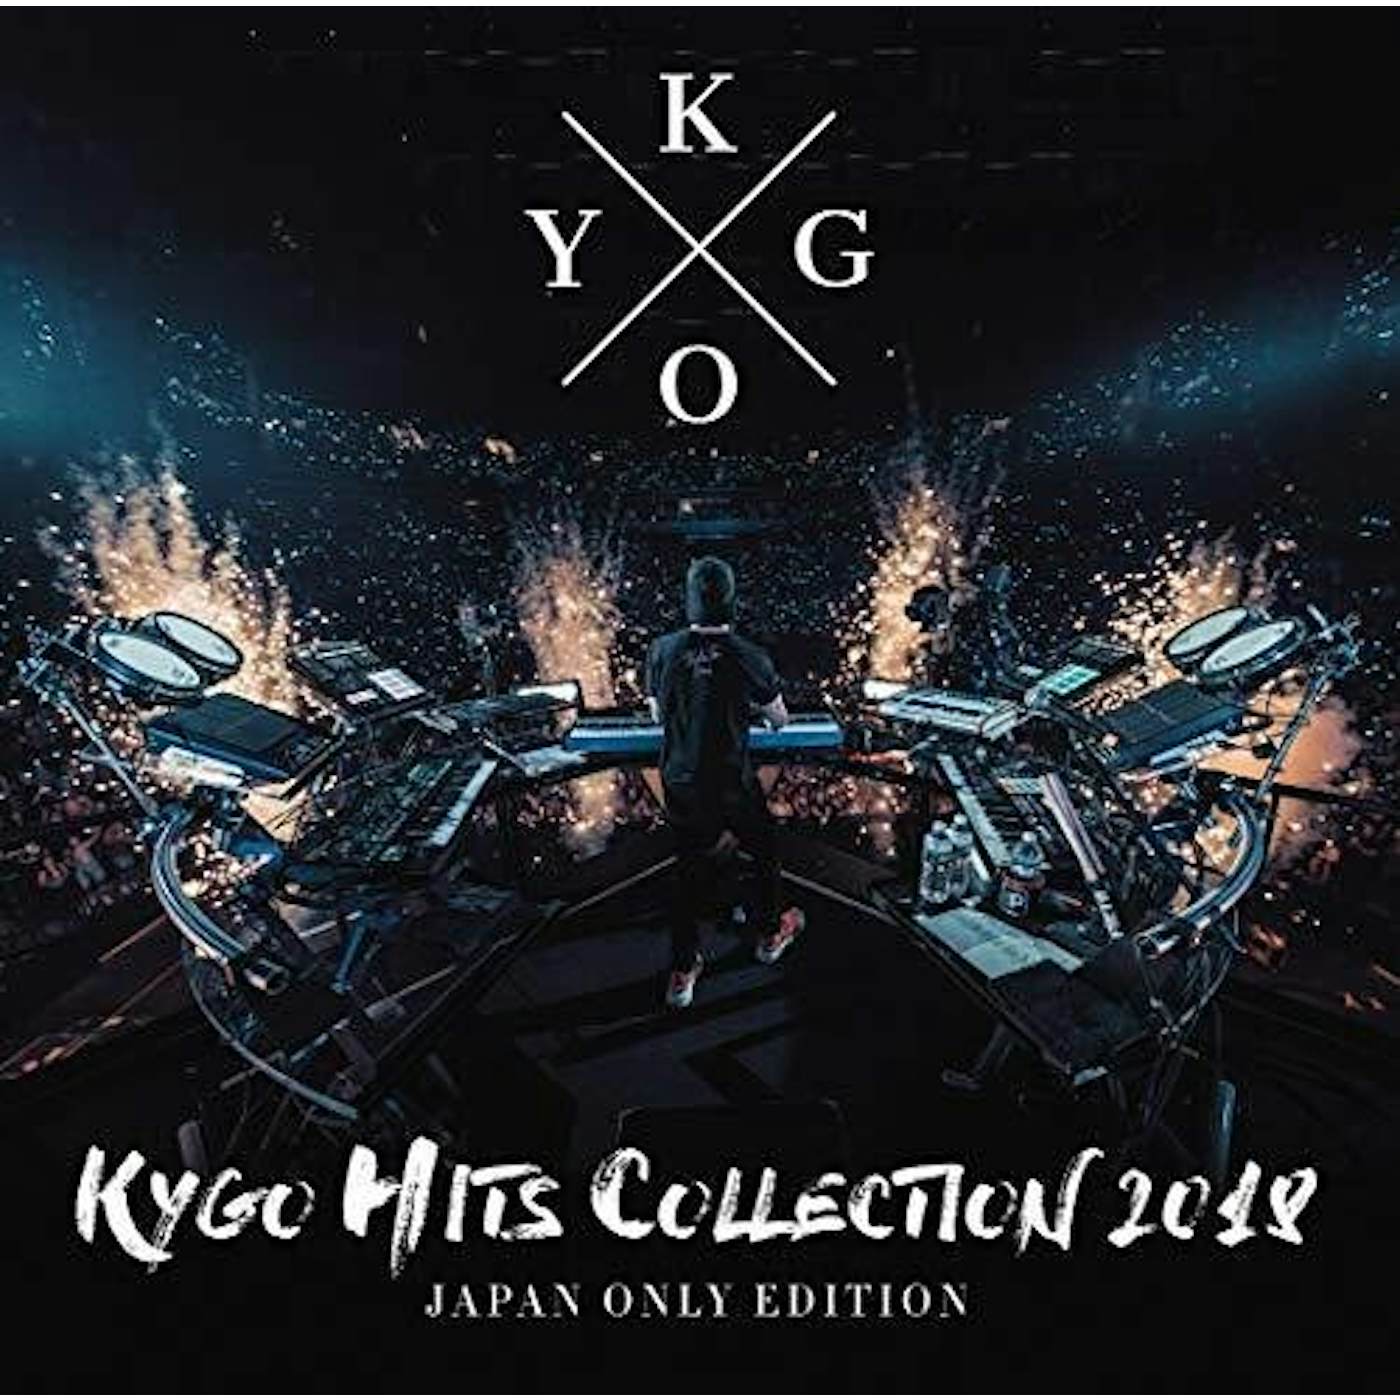 KYGO HITS COLLECTION 2018: JAPAN ONLY EDITION CD